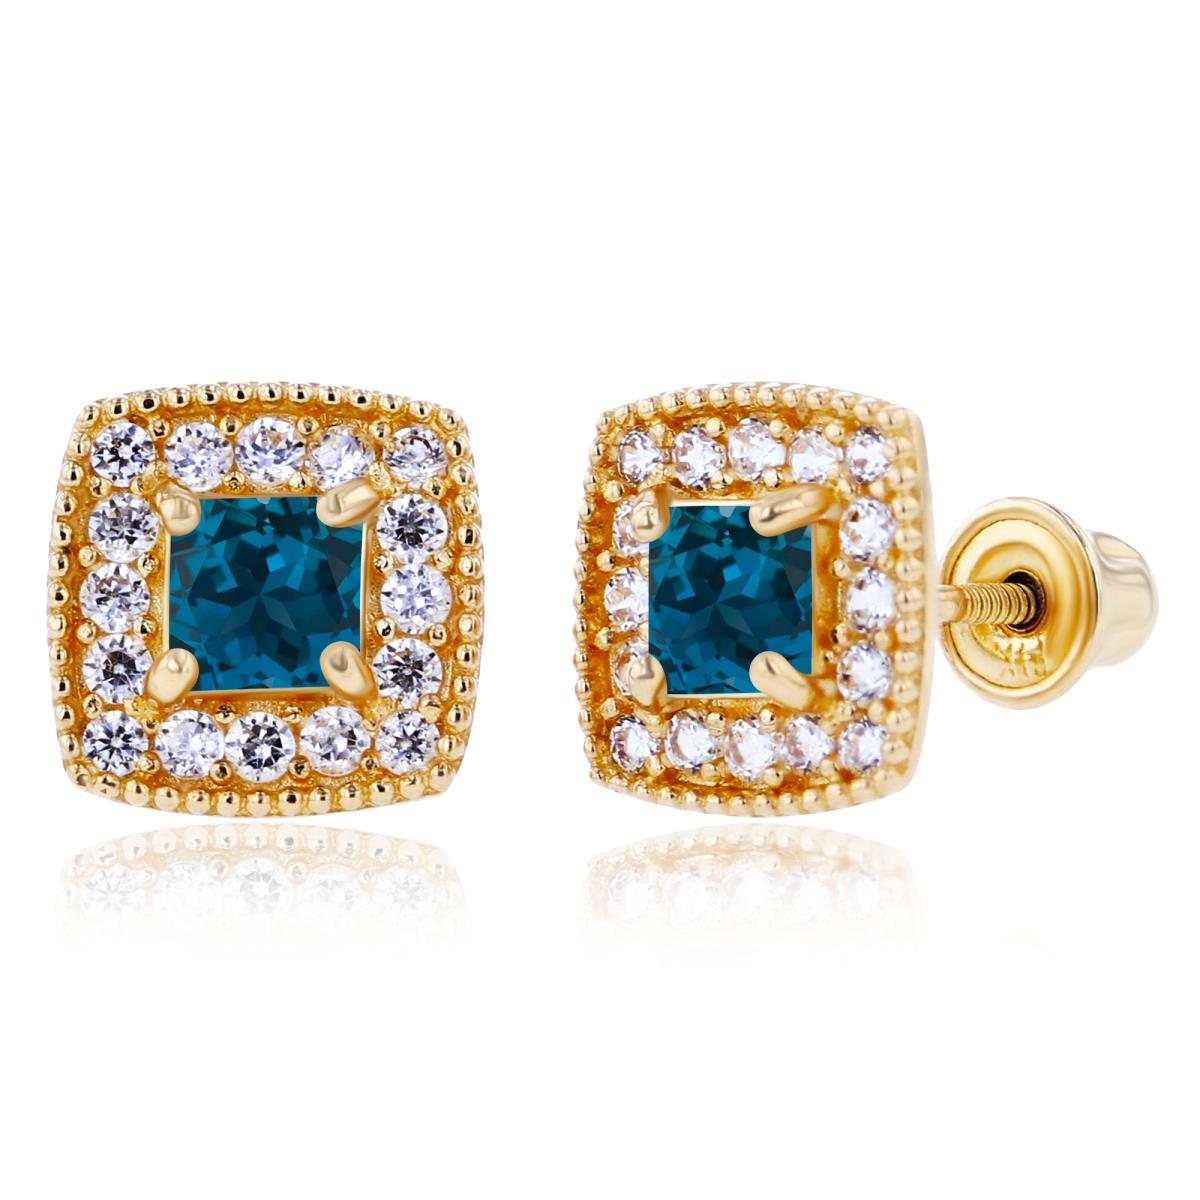 Sterling Silver Yellow 3mm Square London Blue Topaz & 1mm Created White Sapphire Cushion Halo Screwback Earrings